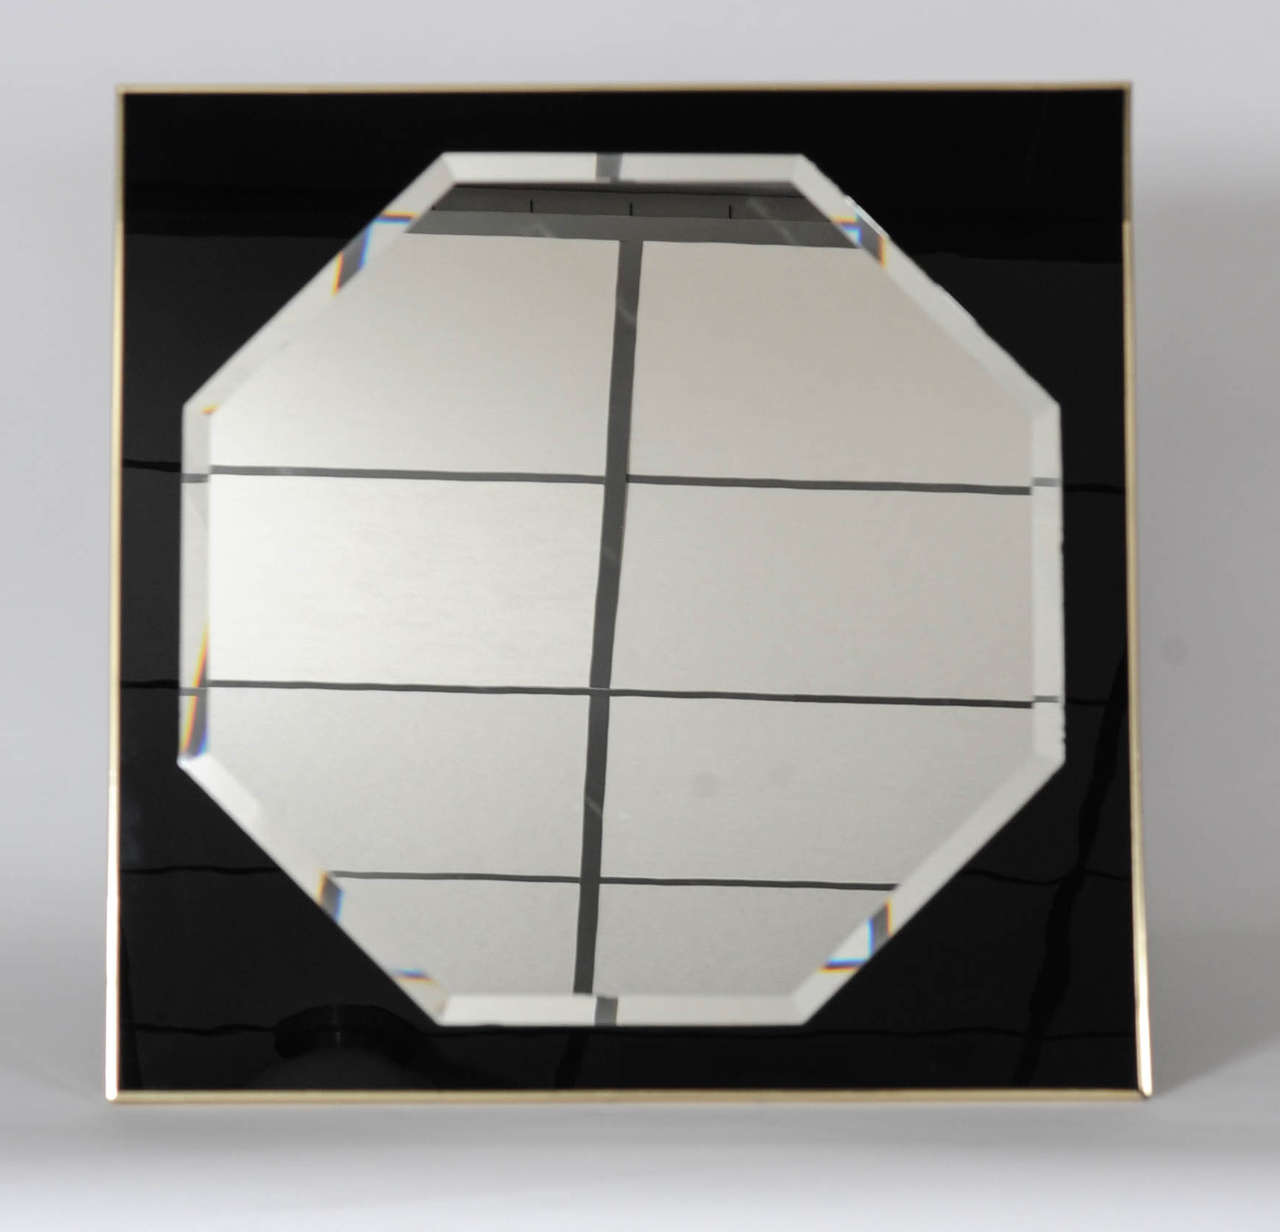 Heavy quality mirror in 1980s nightclub style.
This octagonally shaped mirror (52 x 52 cm) is attached to a black glass square framed by a brass strip.